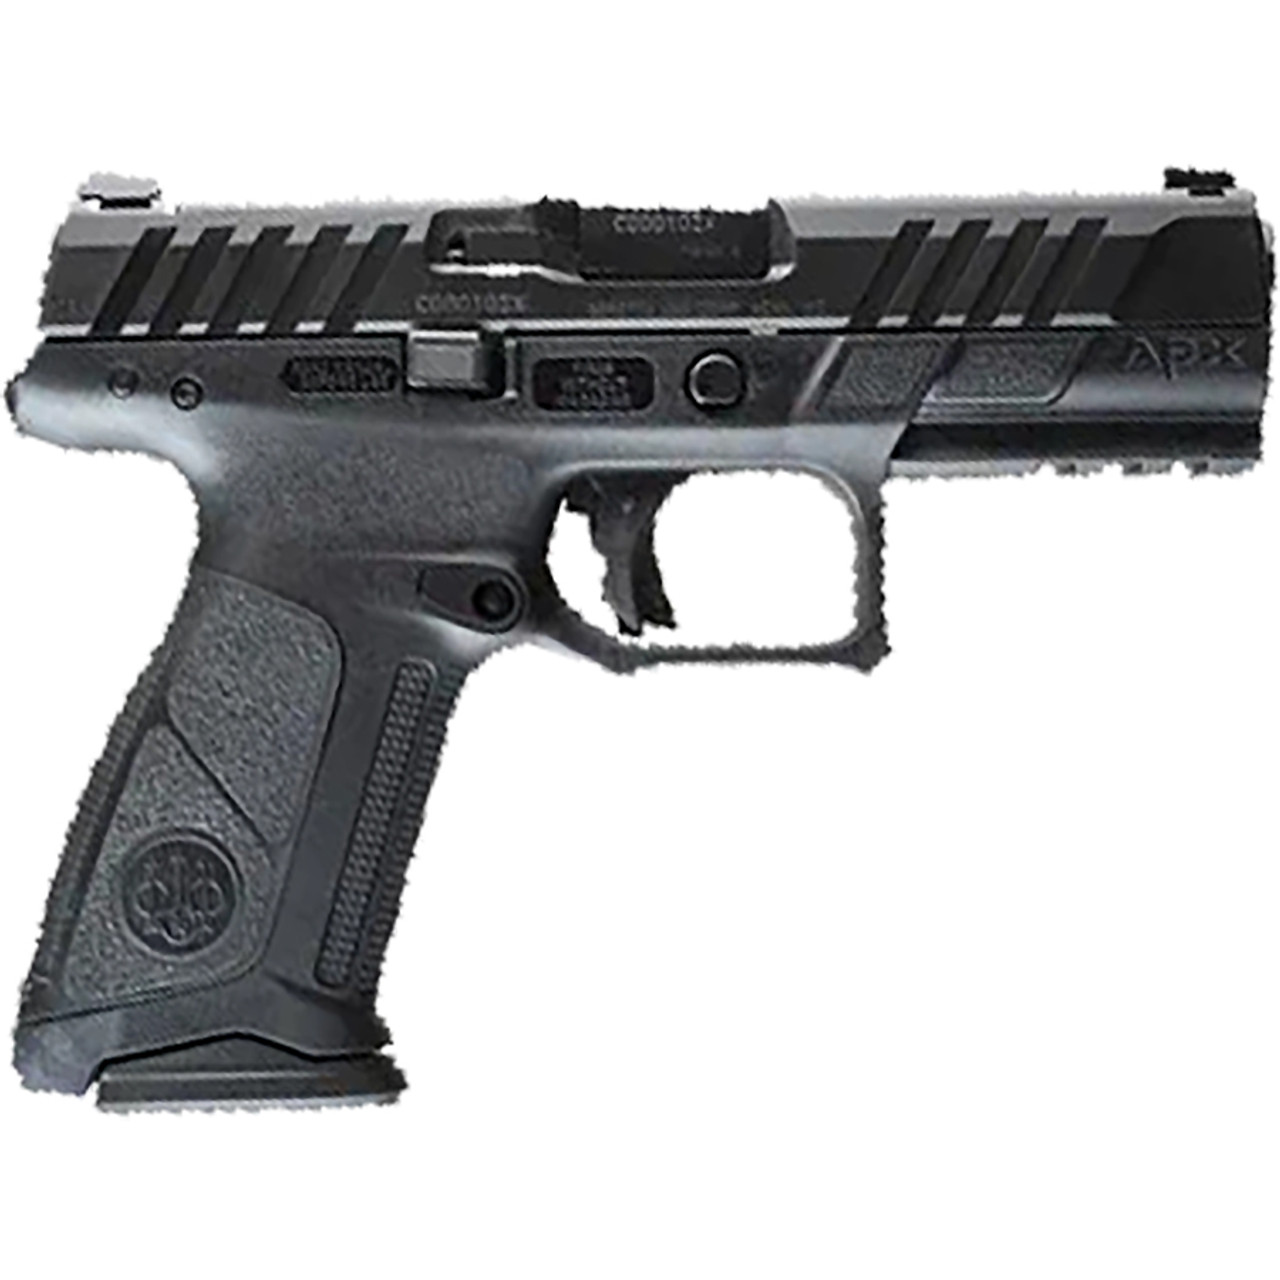 BER APX A1 FULL SIZE RDO 9MM 4.25" BLK FO 17RD